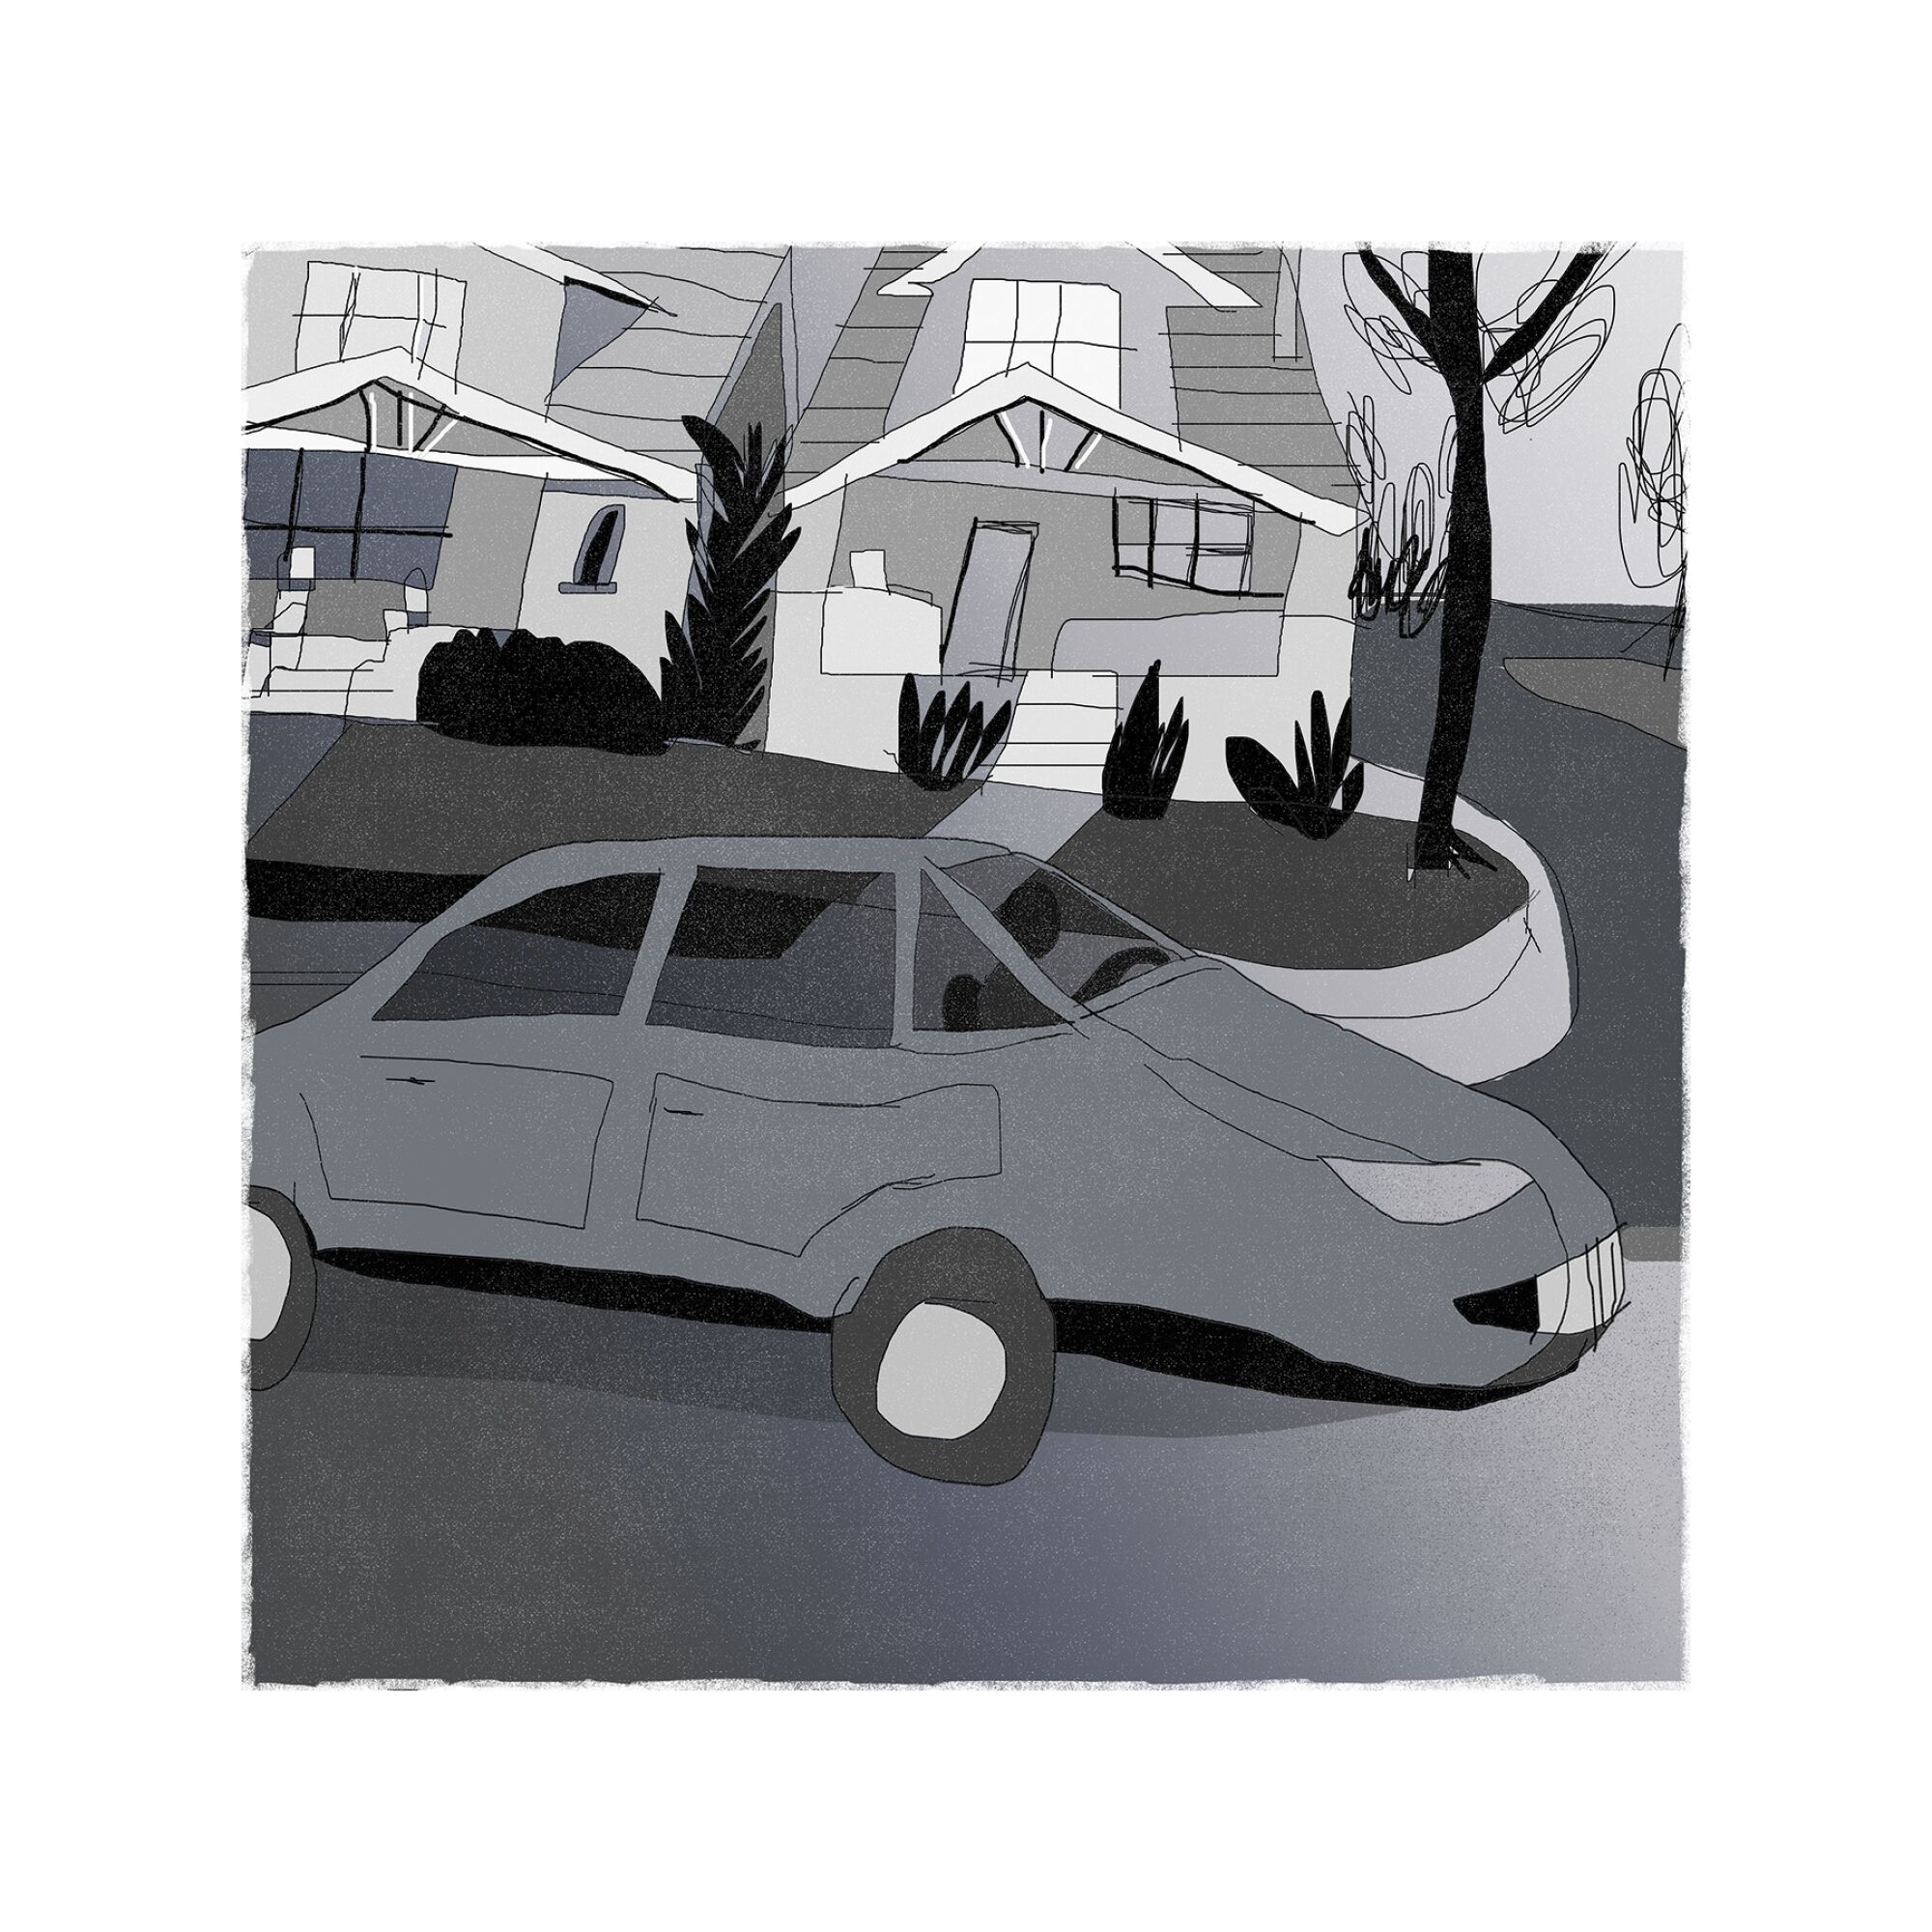 Black-and-white illustration of a car driving past houses in the background.